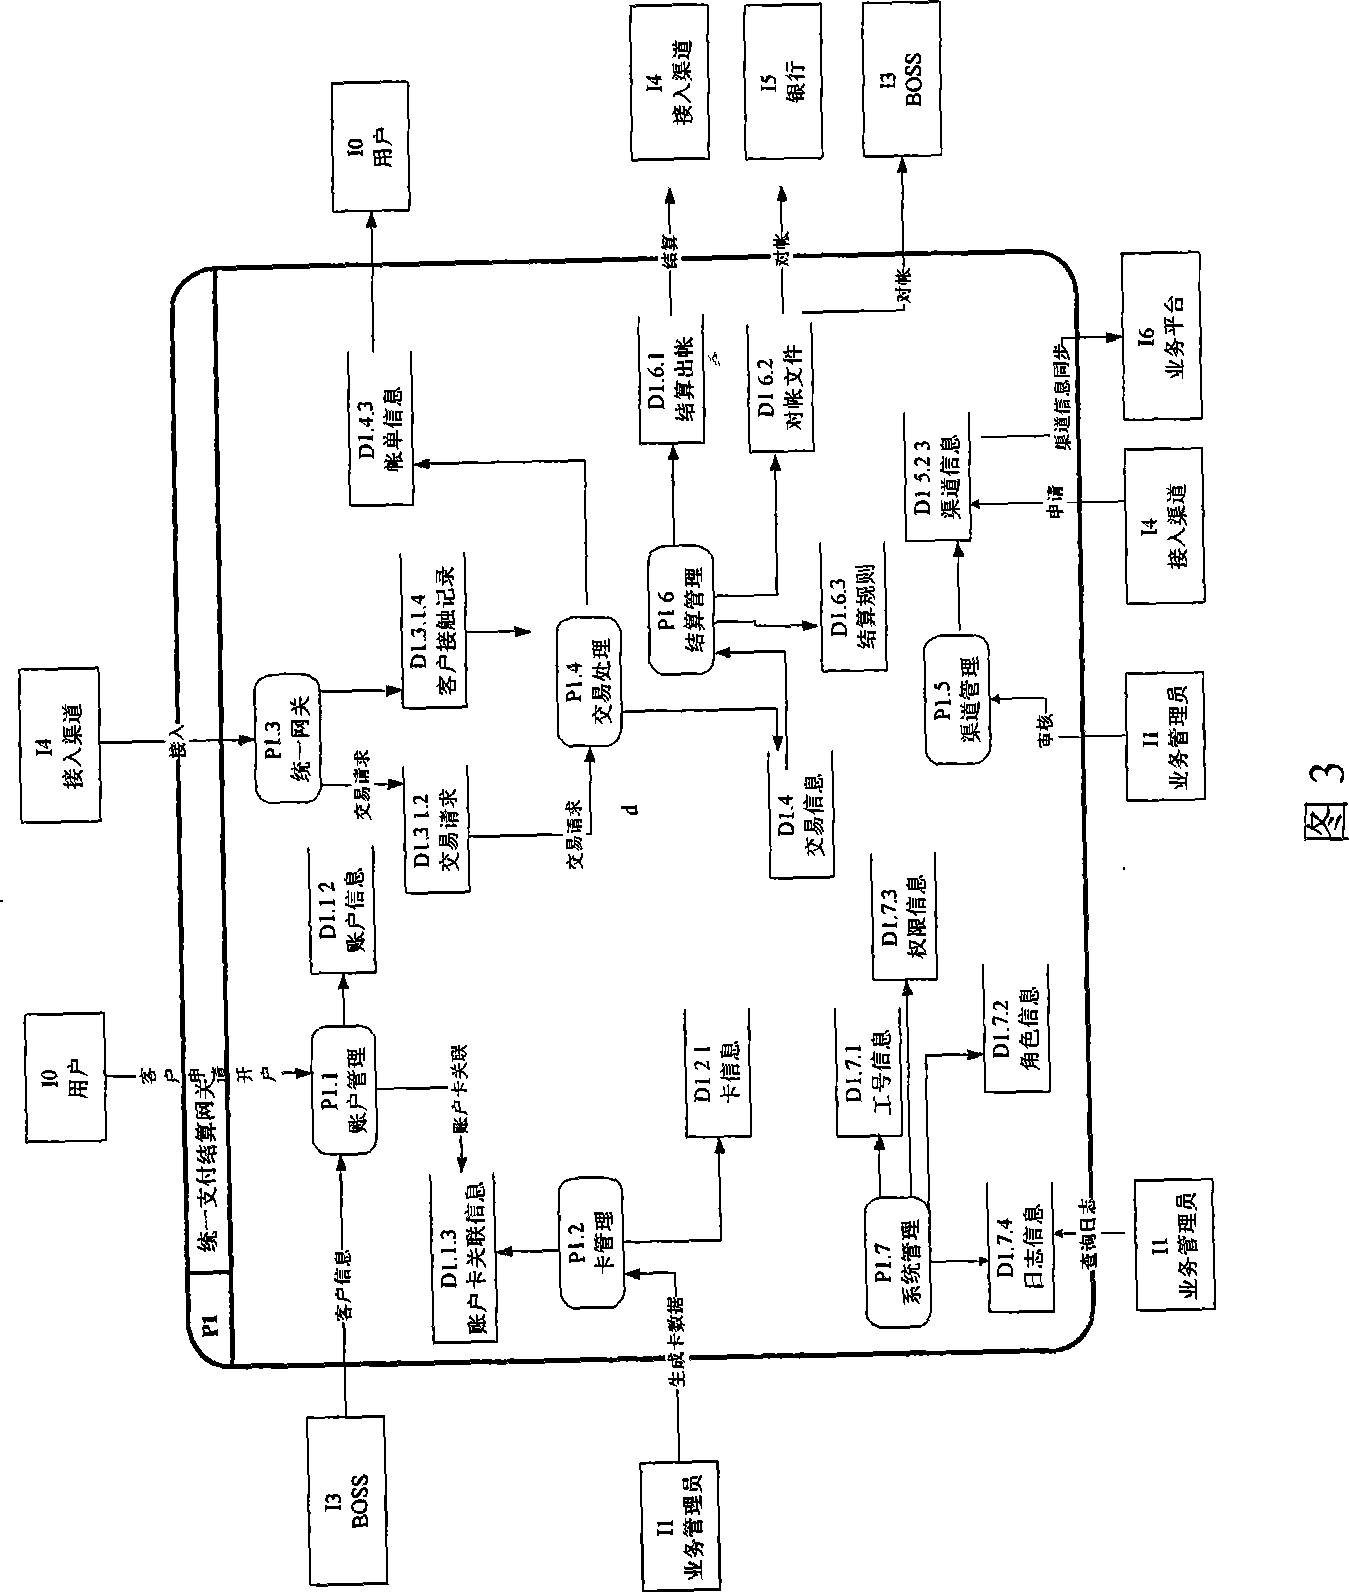 Gateway system for telecommunication stage payment and settlement